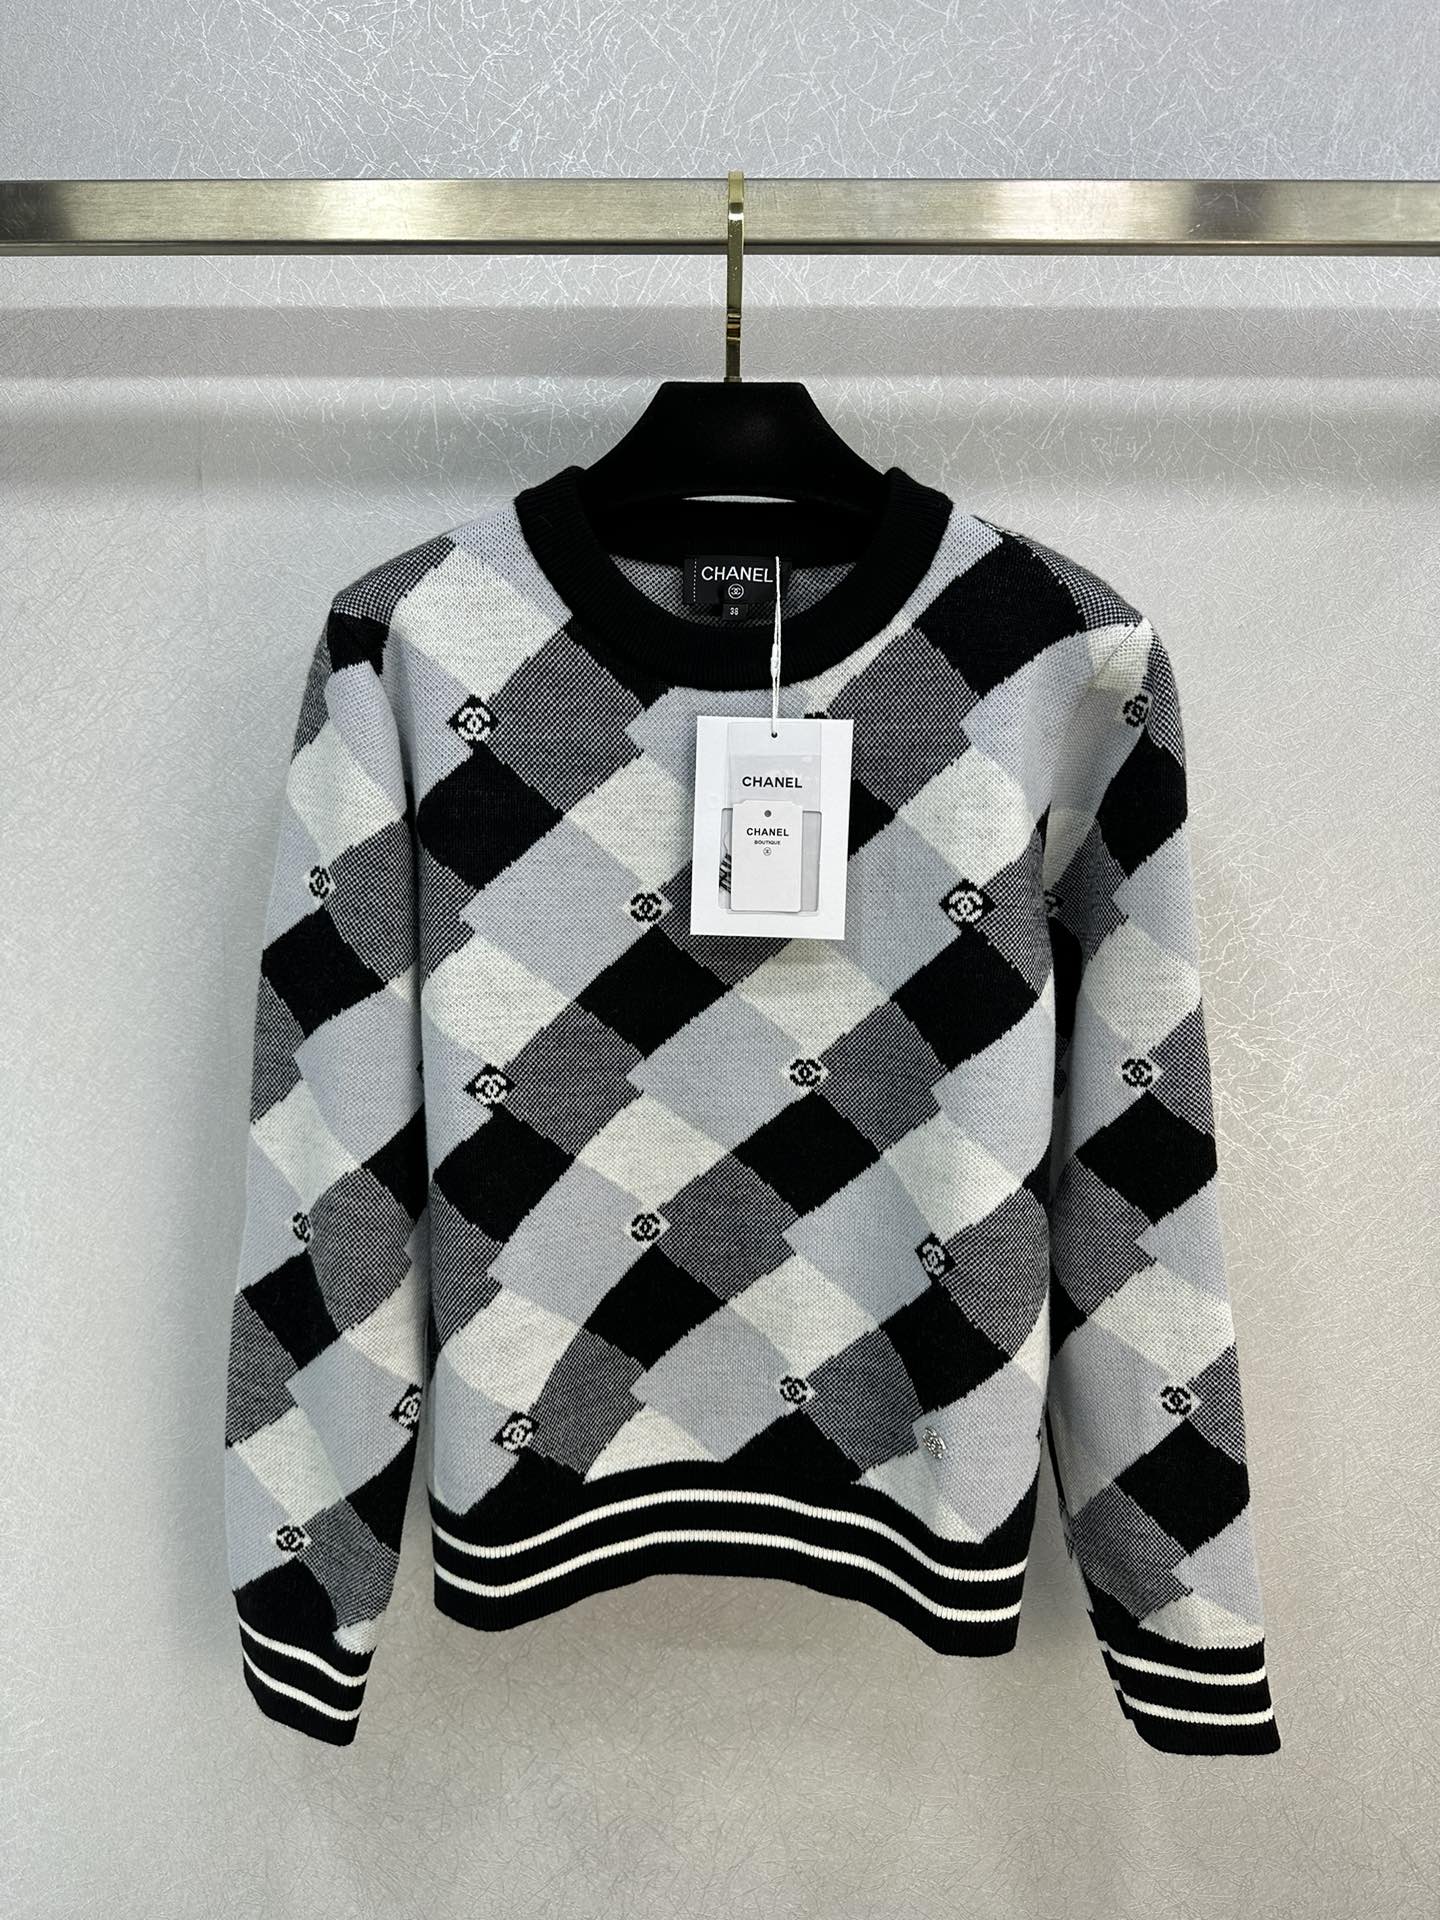 Chanel Clothing Knit Sweater Knitting Fall/Winter Collection